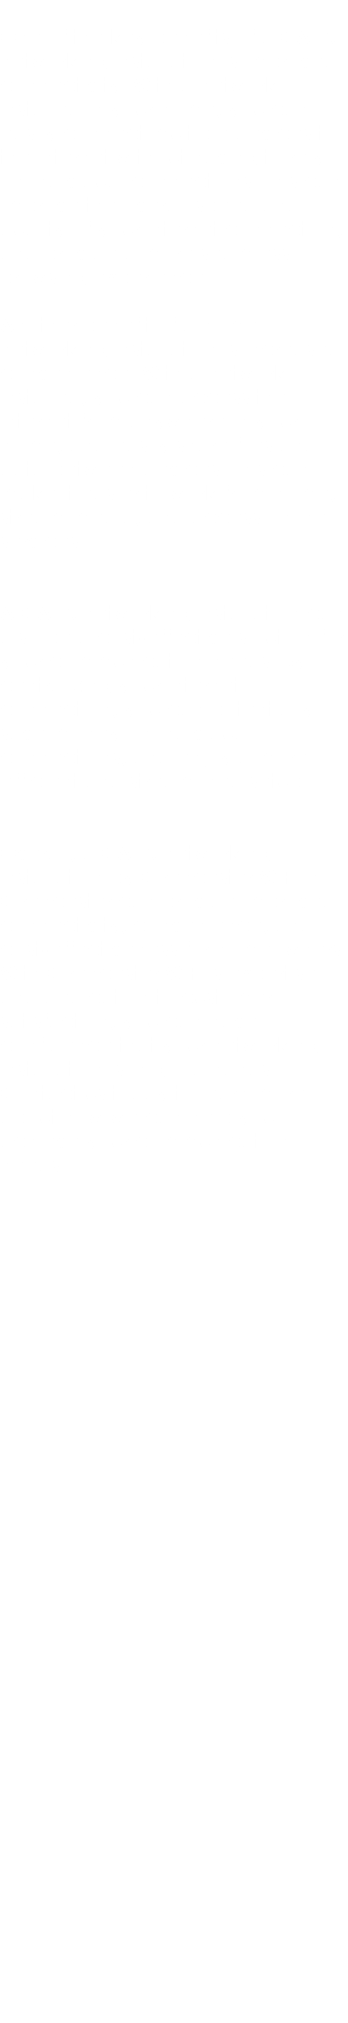  One of the key benefits of a CAT 5 networking installation is improved connectivity. With a network installed in your home, you can easily connect multiple devices to the internet without having to rely on individual connections. This can improve the overall speed and quality of your internet connection, and provide a more seamless browsing experience. Another benefit of a home networking installation is increased convenience. With a network installed, you can access the internet from anywhere in your home, and easily share files and data between devices. This can make it easier to work from home, stream media, and access online services. A CAT 5 networking installation can also be a cost-effective solution for your communication needs. By centralizing your internet connection, you can potentially save money on individual connections, and enjoy a more efficient and streamlined setup. Overall, a CAT 5 networking installation by Cirencester WiFi in Cirencester can provide improved connectivity, convenience, and cost-effectiveness for homeowners. With Cirencester WiFi 's expertise and dedication to customer satisfaction, you can have confidence that your networking installation is in good hands. Contact us today to learn more about how we can help you achieve your communication needs.